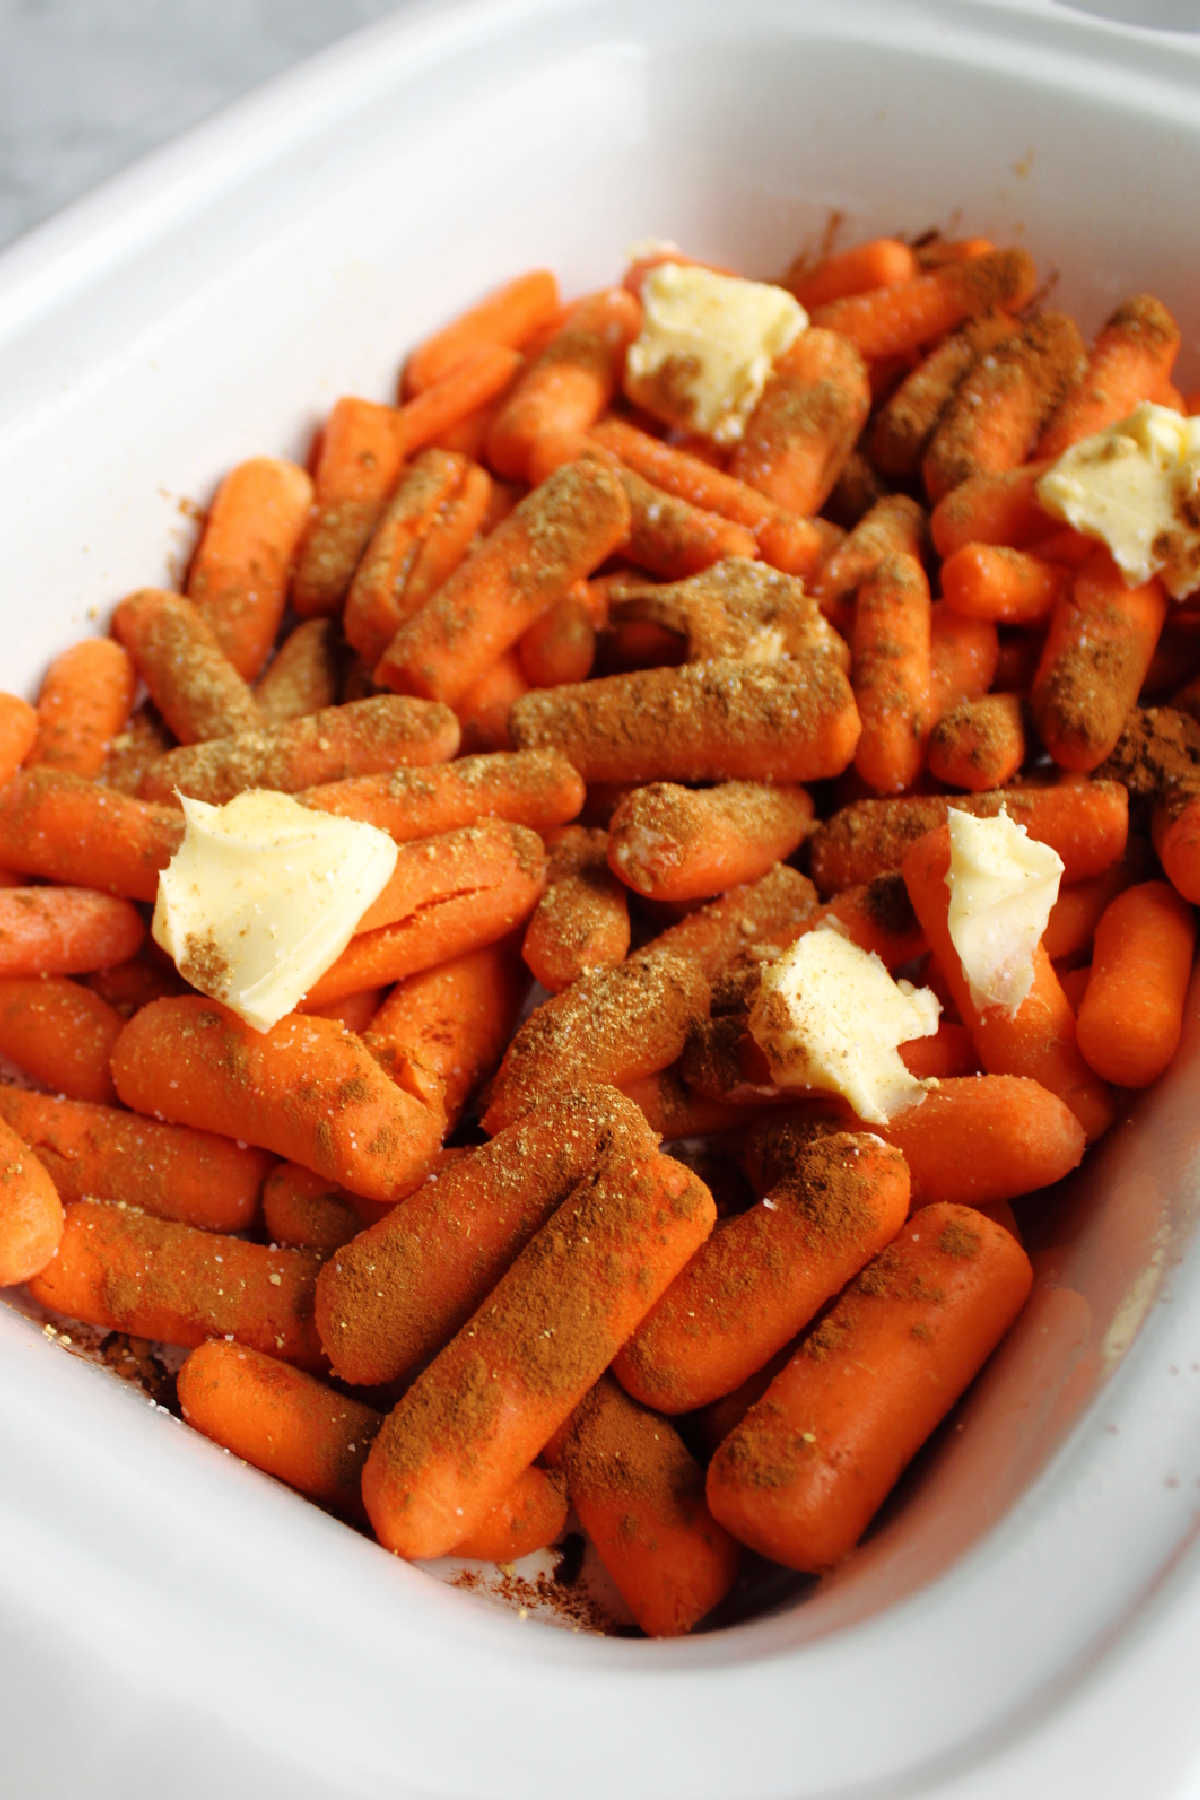 Carrots topped with cinnamon and butter in slow cooker.